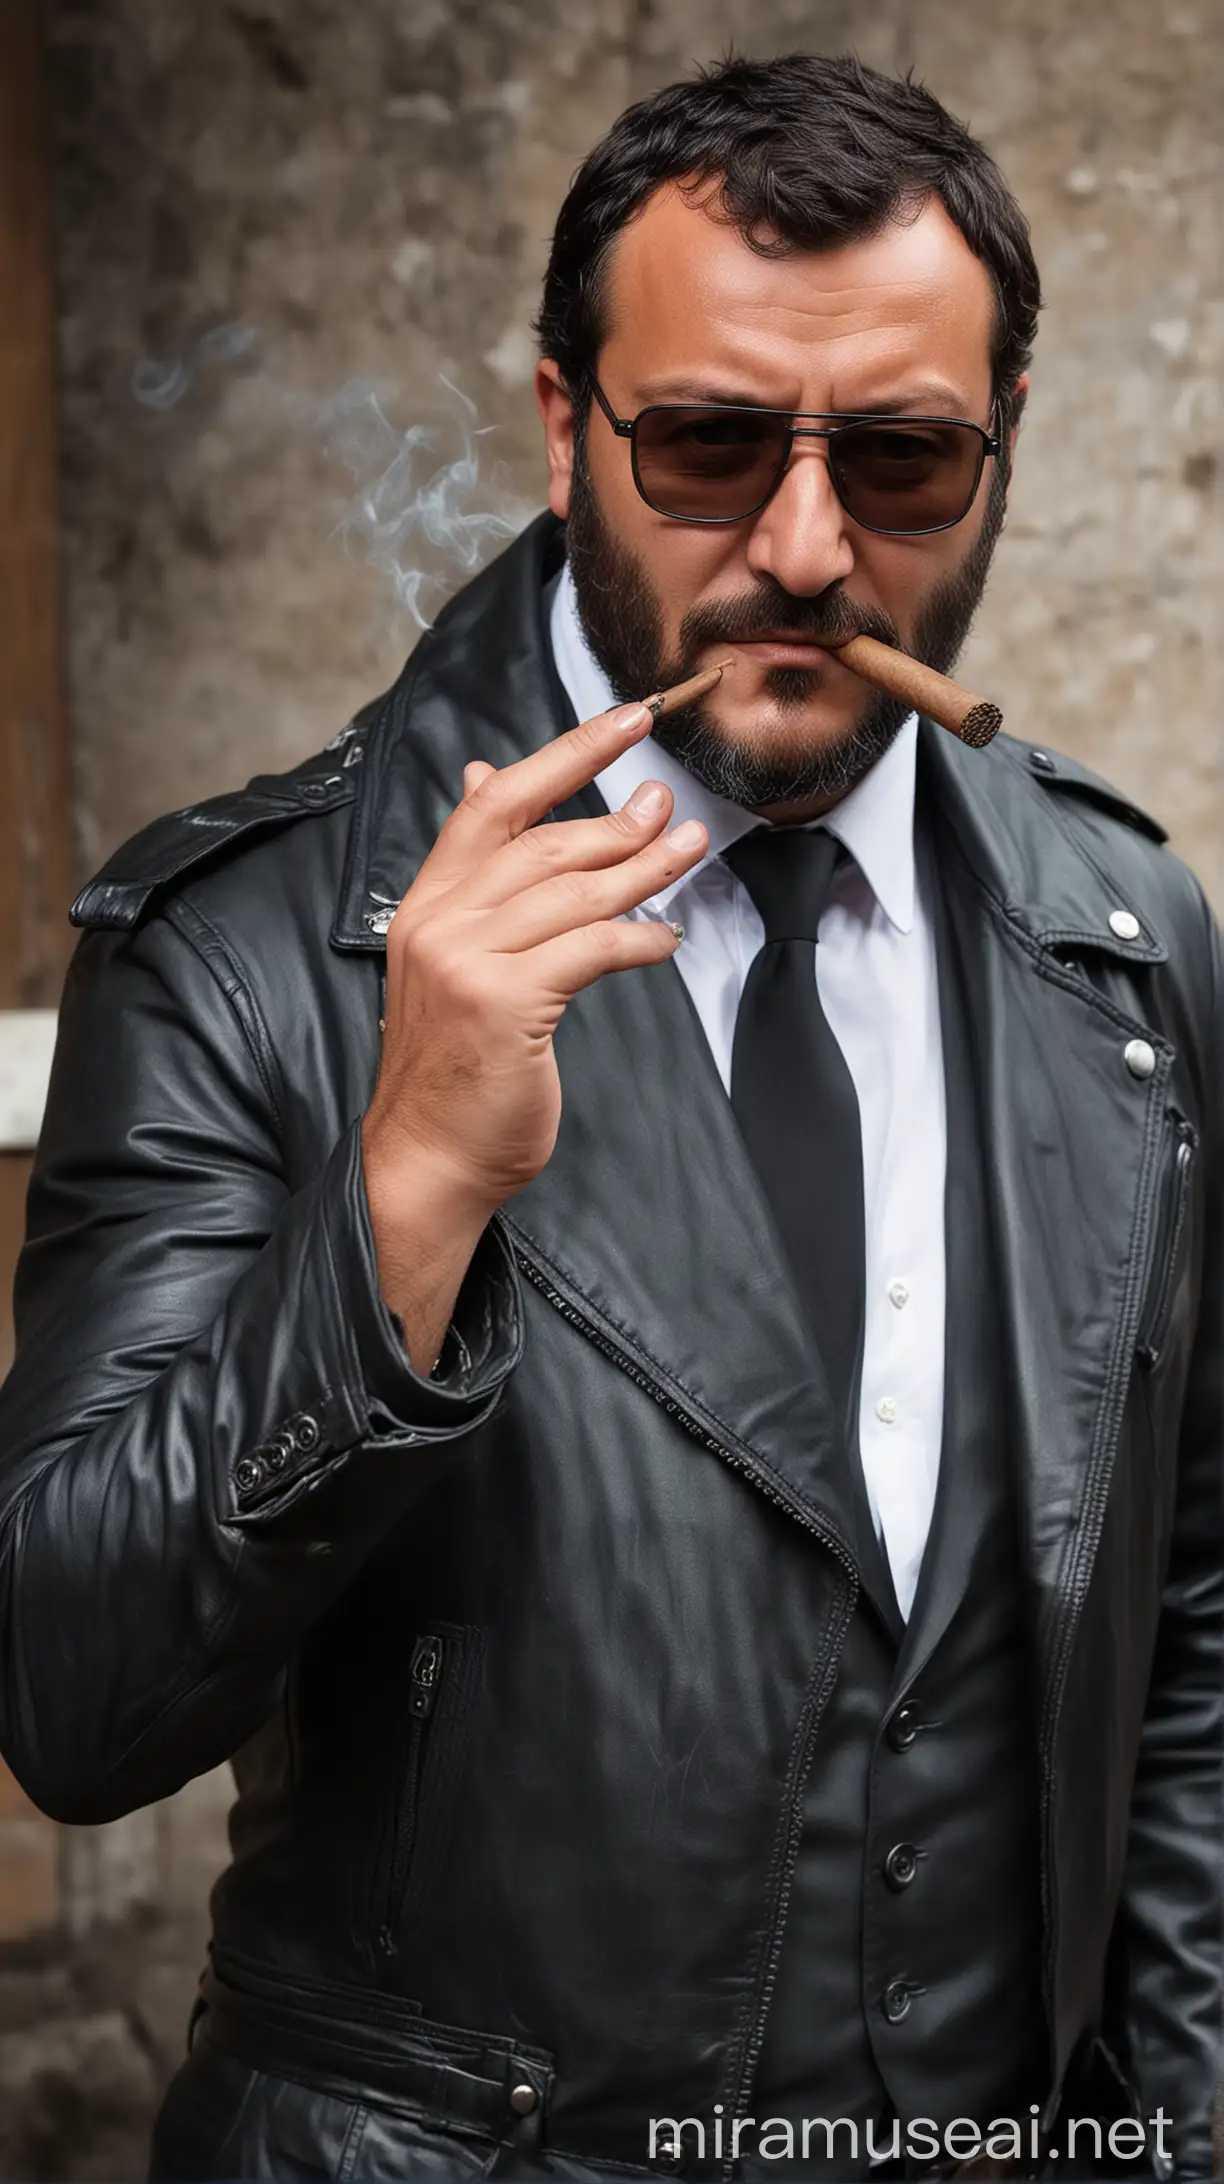 A manly muscled and bearded Matteo Salvini smoking a big cigar black leather biker style dressed wearing glasses